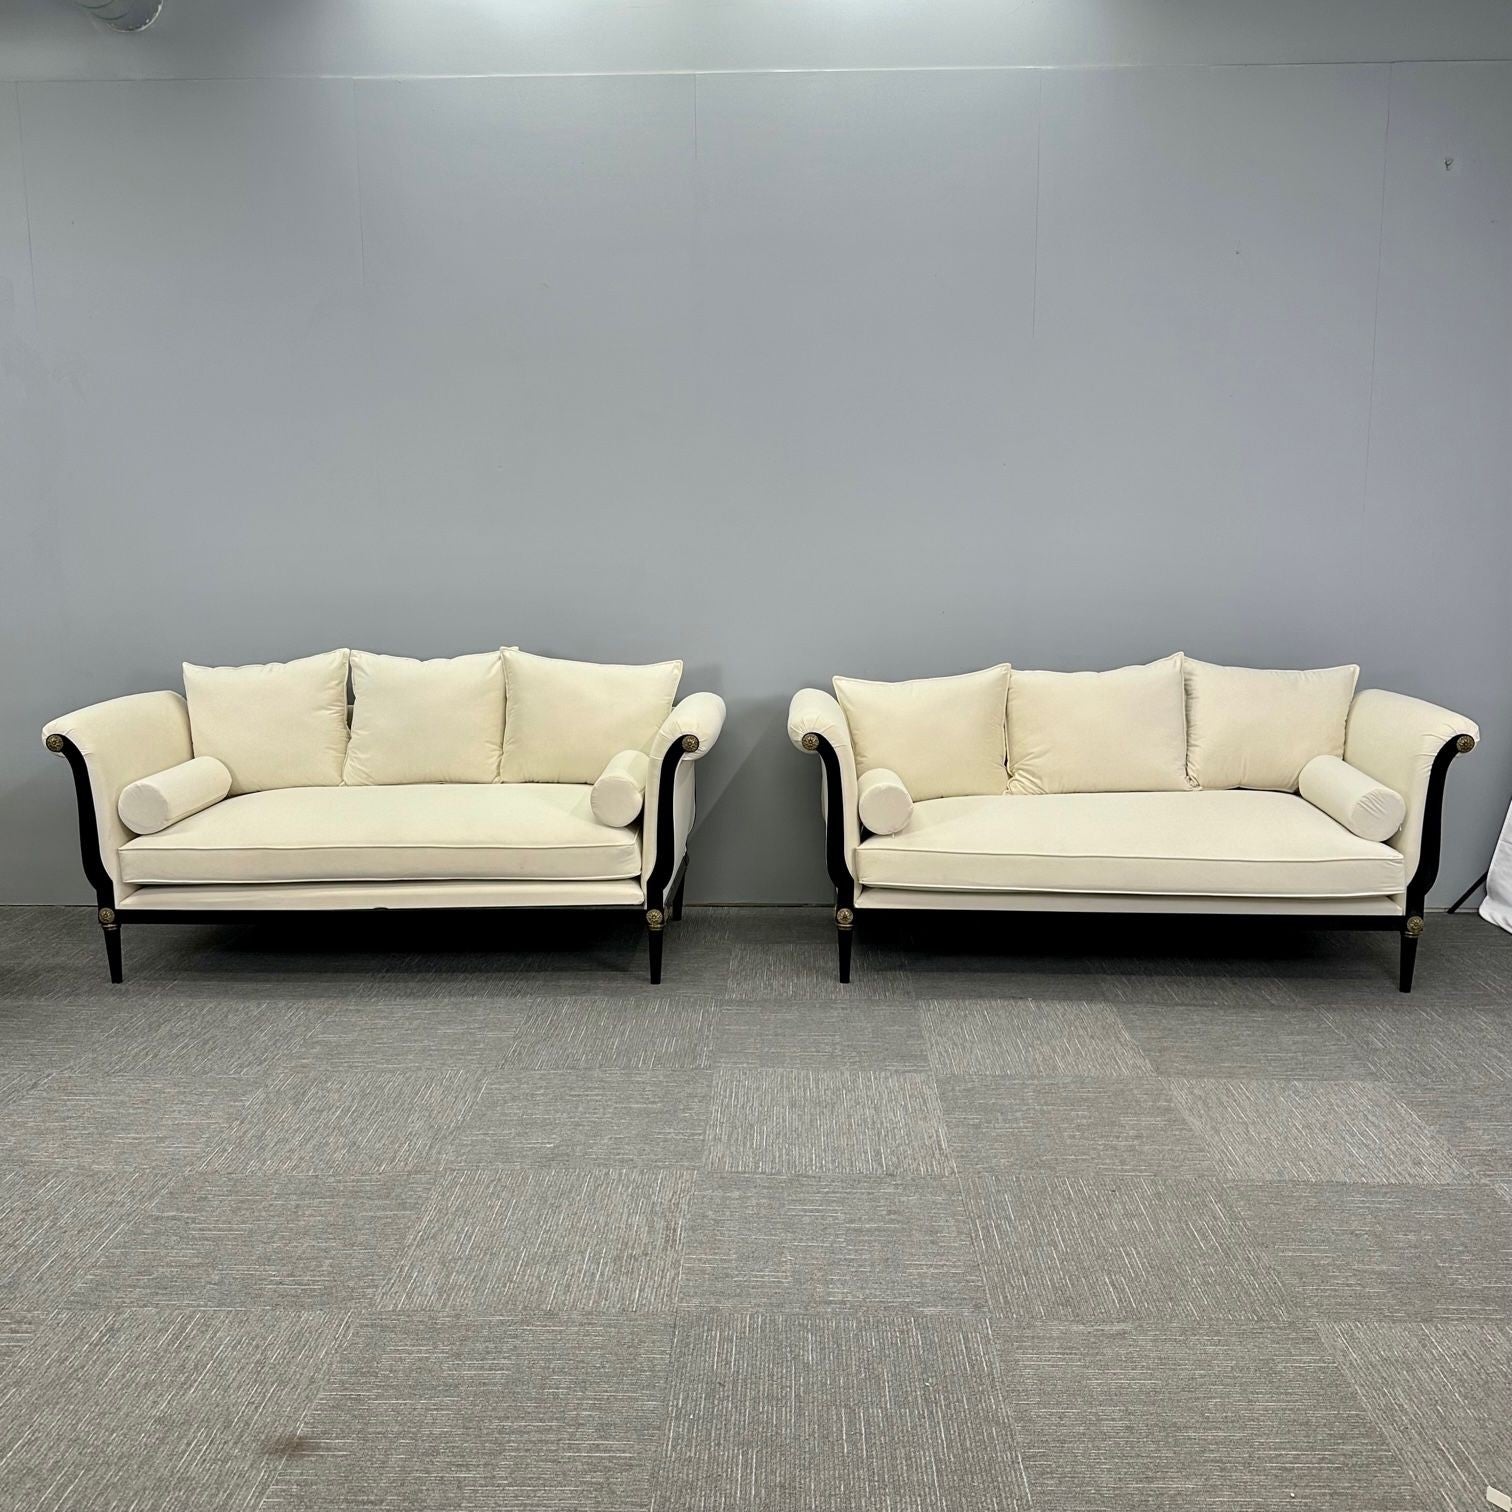 Pair of Steel and Bronze Sofas / Settees, Hollywood Regency, Peter Marino Style For Sale